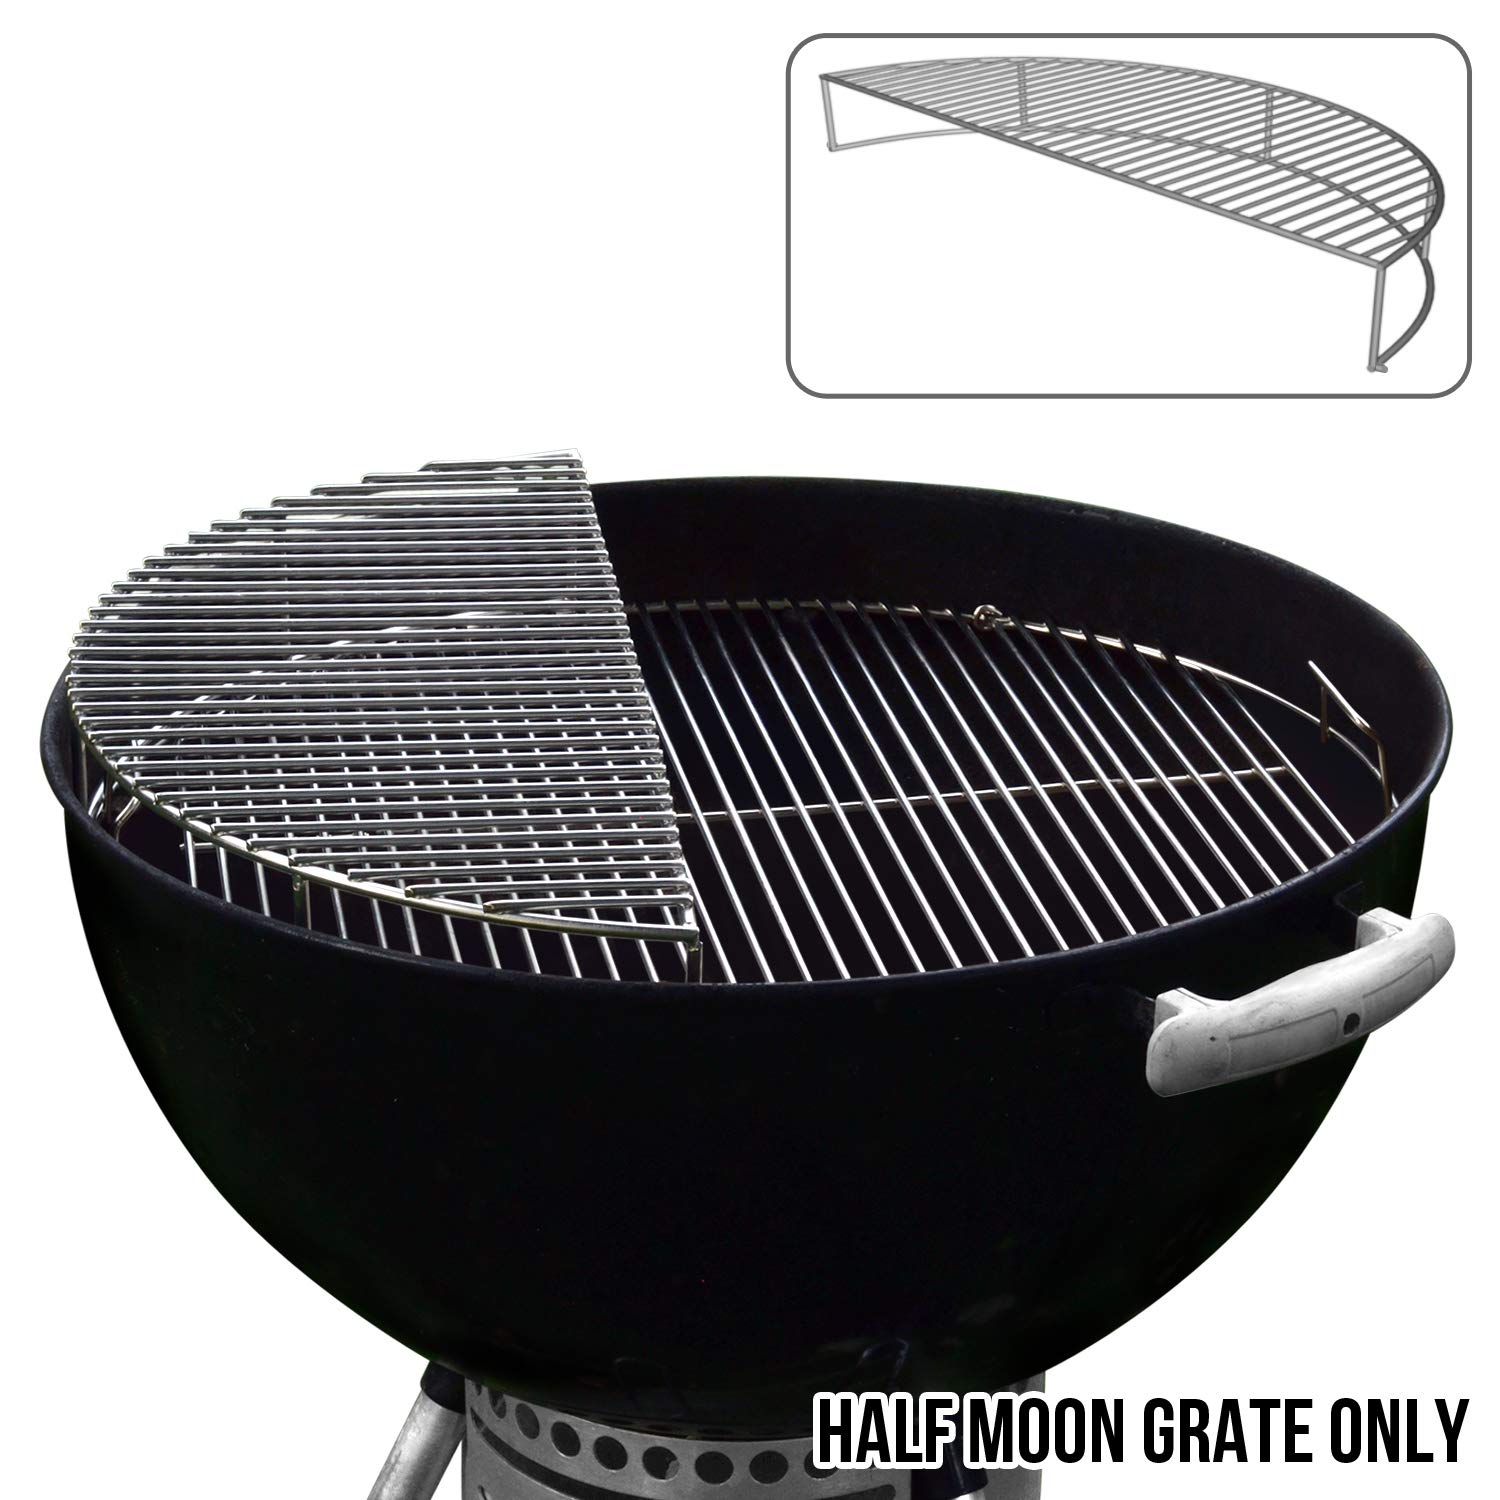 The Original 'Upper Deck' Stainless Steel Grilling Rack/Warming Rack/Smoking Rack/Charcoal Grill Grate- Use with Weber 22 inch Kettle Grill- Charcoal Grilling Accessories and Grill Tools Grill Rack? - image 1 of 6